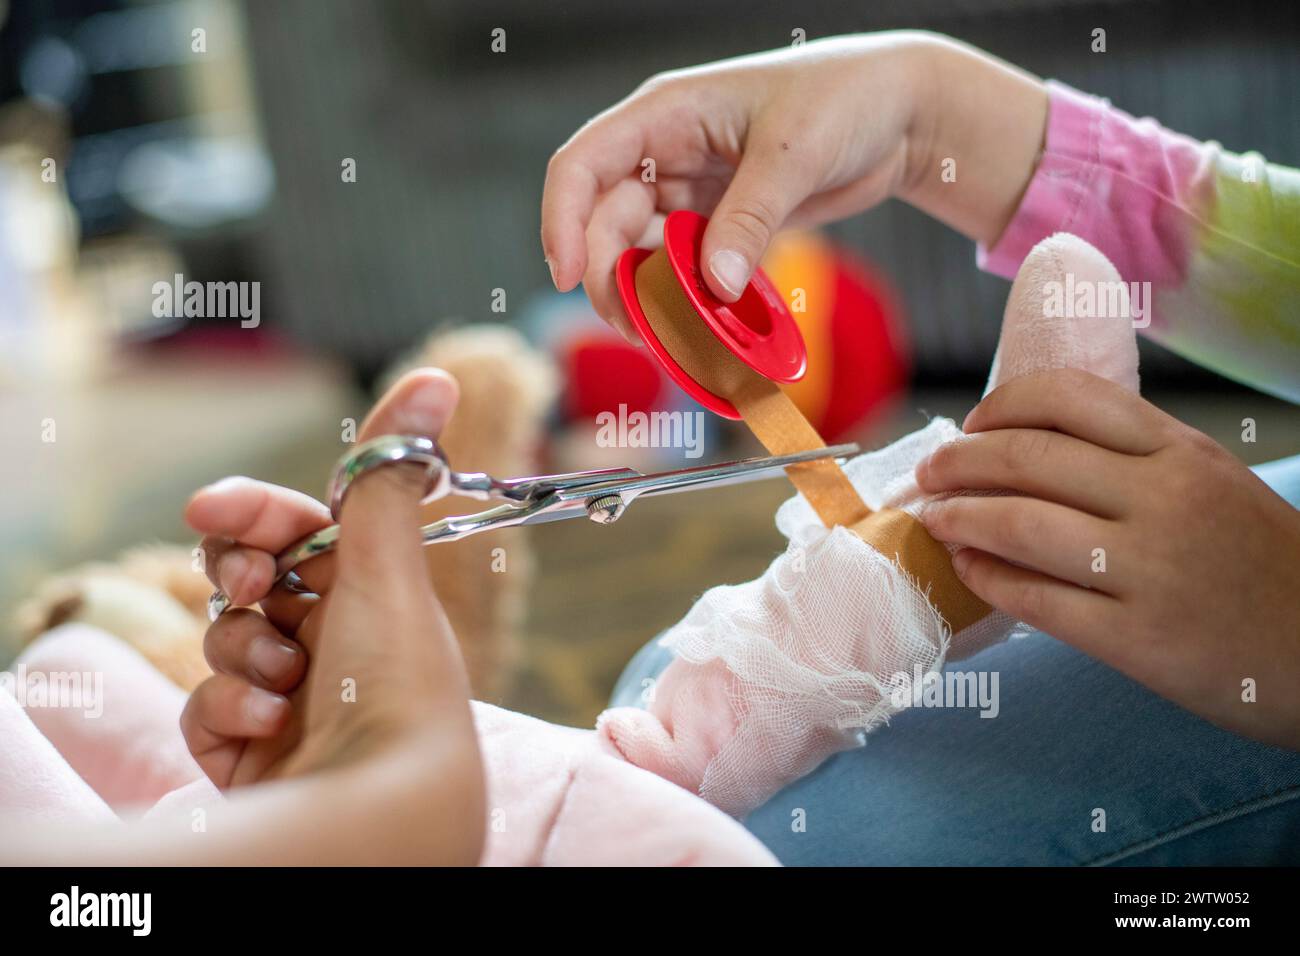 Gentle hands carefully cutting a bandage from a healing wound Stock Photo